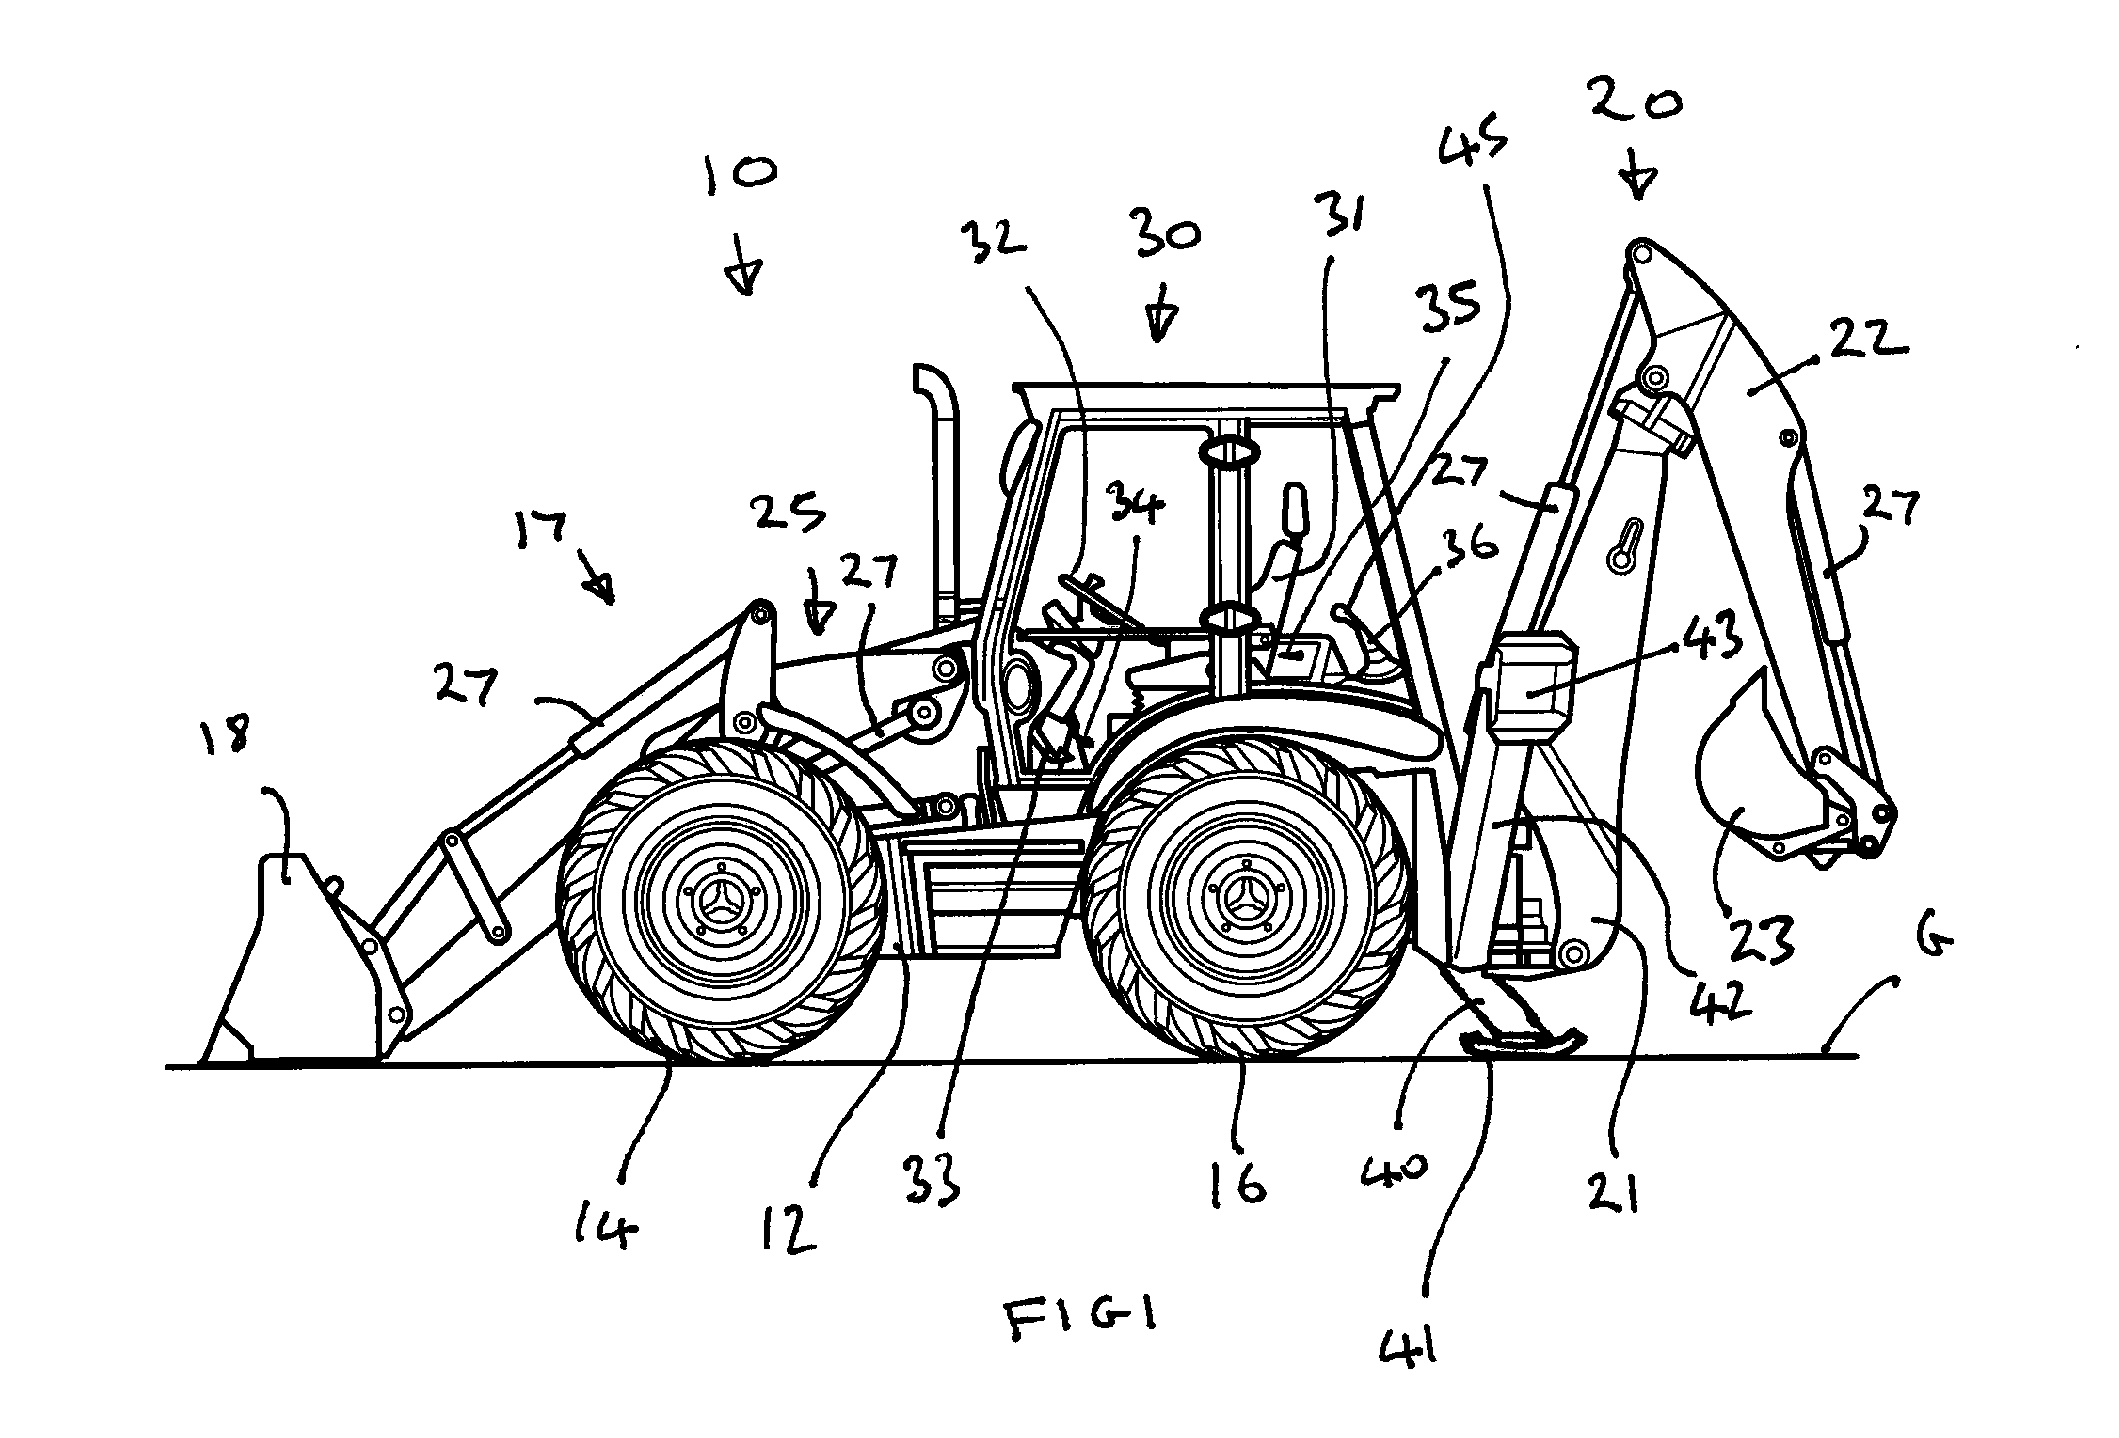 Method of operating a material handling machine